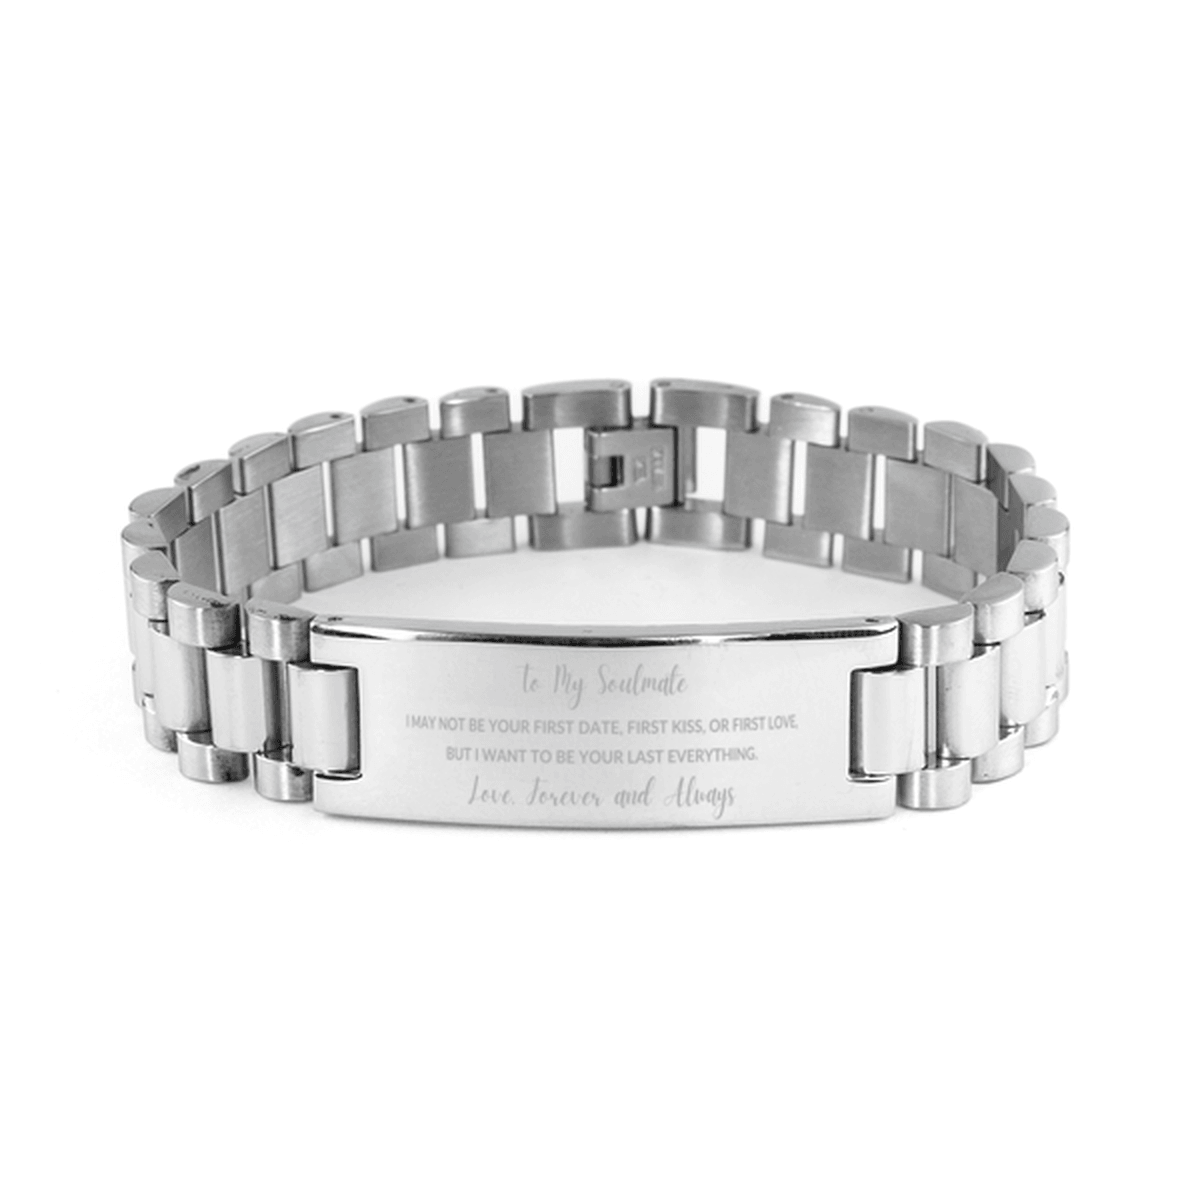 Romantic Soulmate Engraved Ladder Stainless Steel Bracelet - I Want to be Your Last Everything - Birthday, Christmas Holiday, Valentine Gifts - Mallard Moon Gift Shop